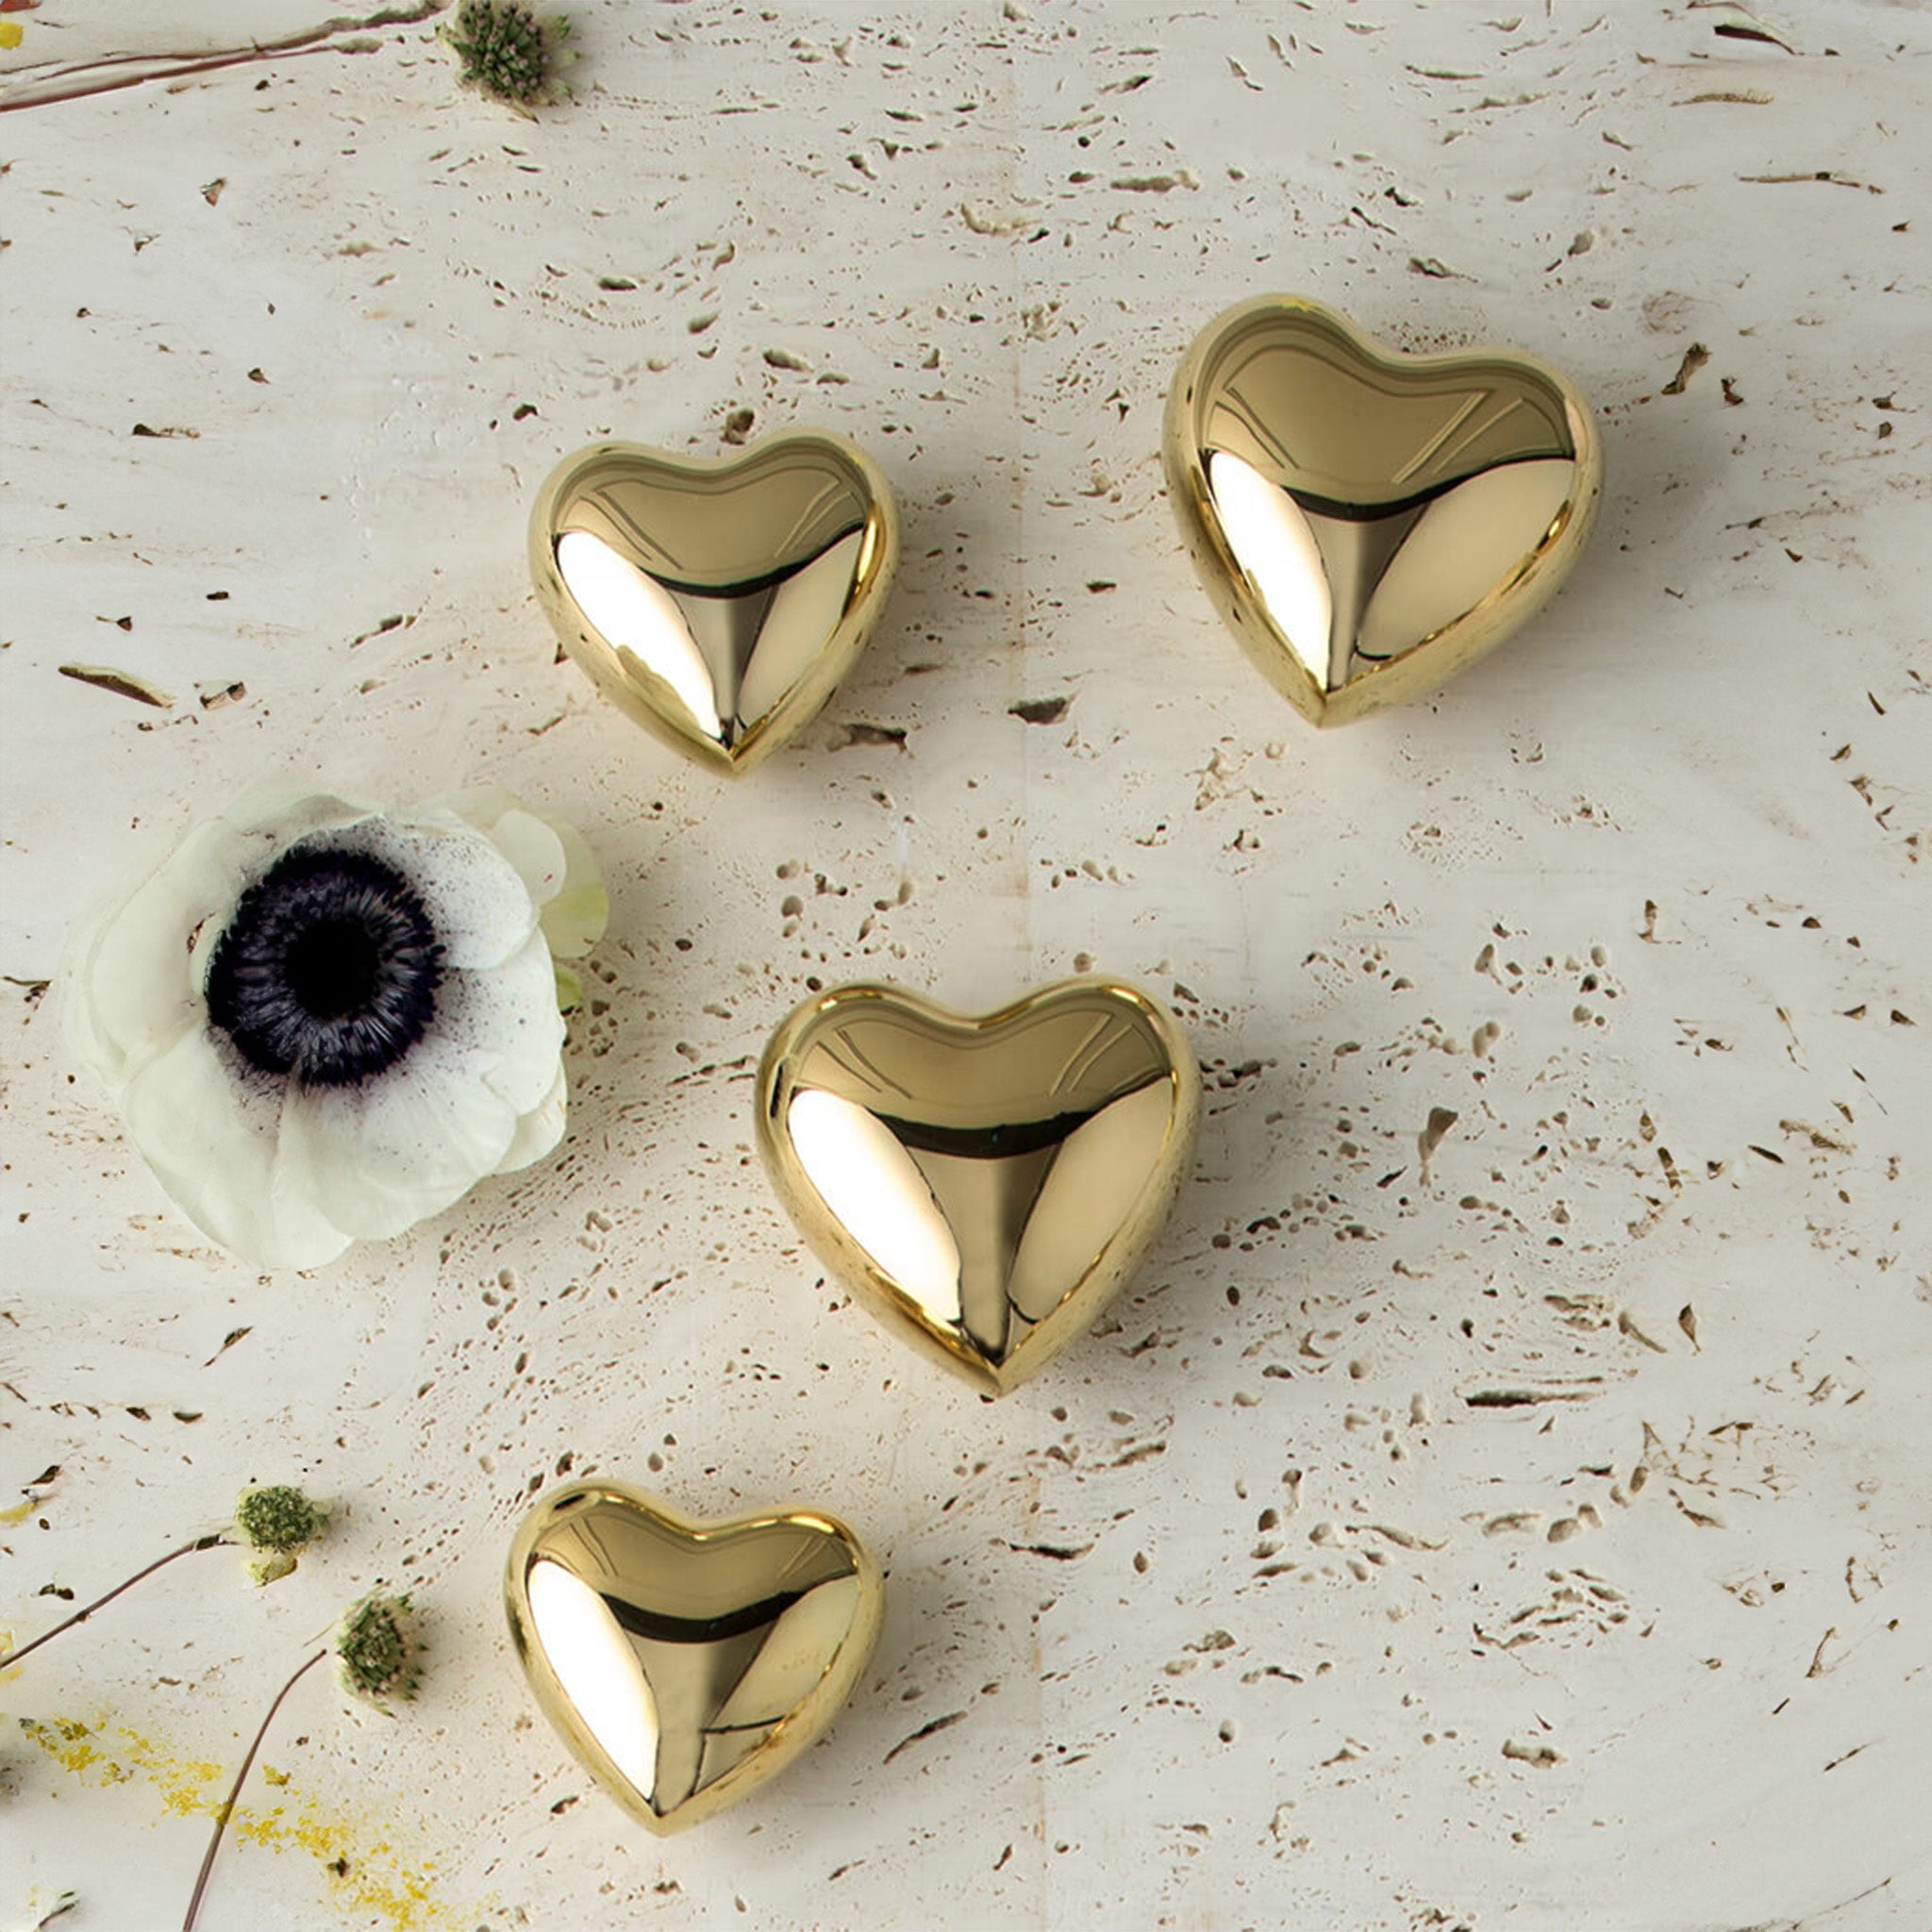 a group of four gold heart paperweights sitting next to a white flower